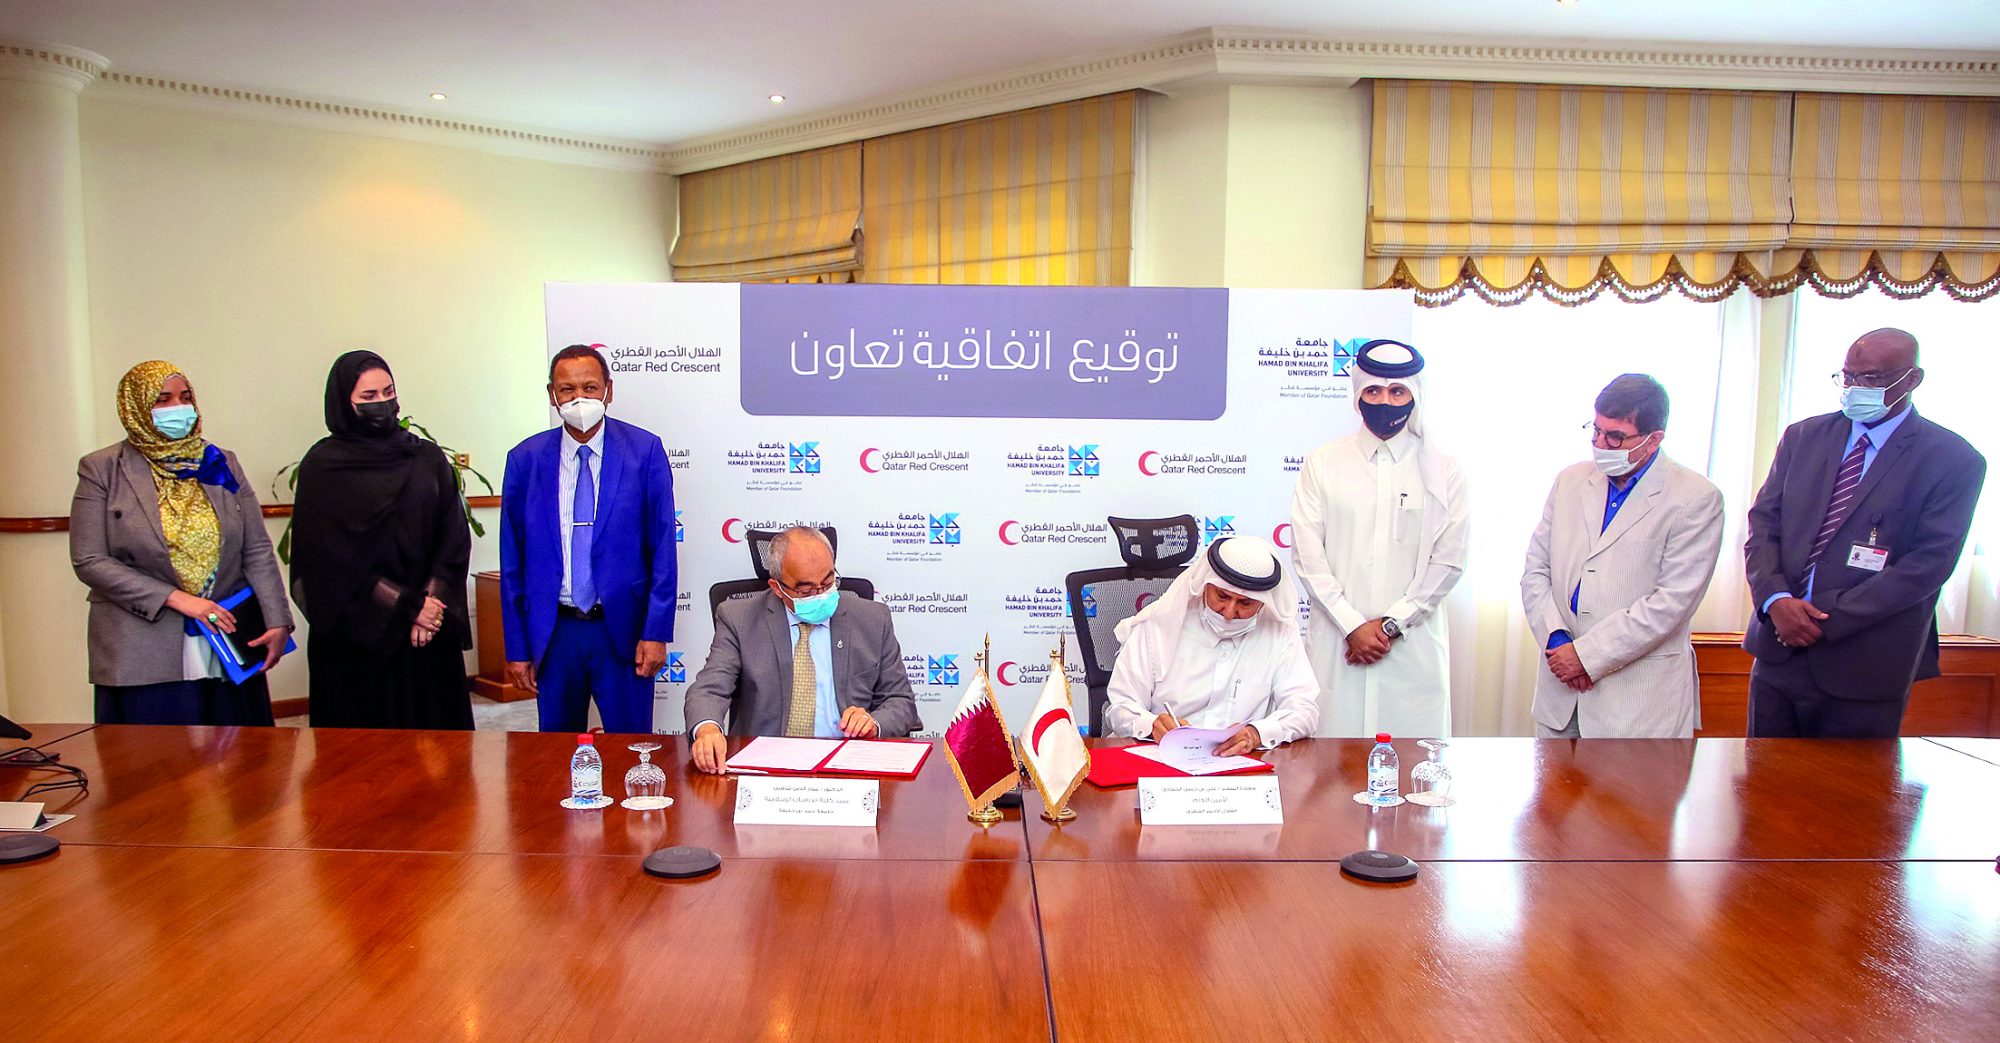 QRCS and HBKU Sign an Agreement to Enhance Cooperation